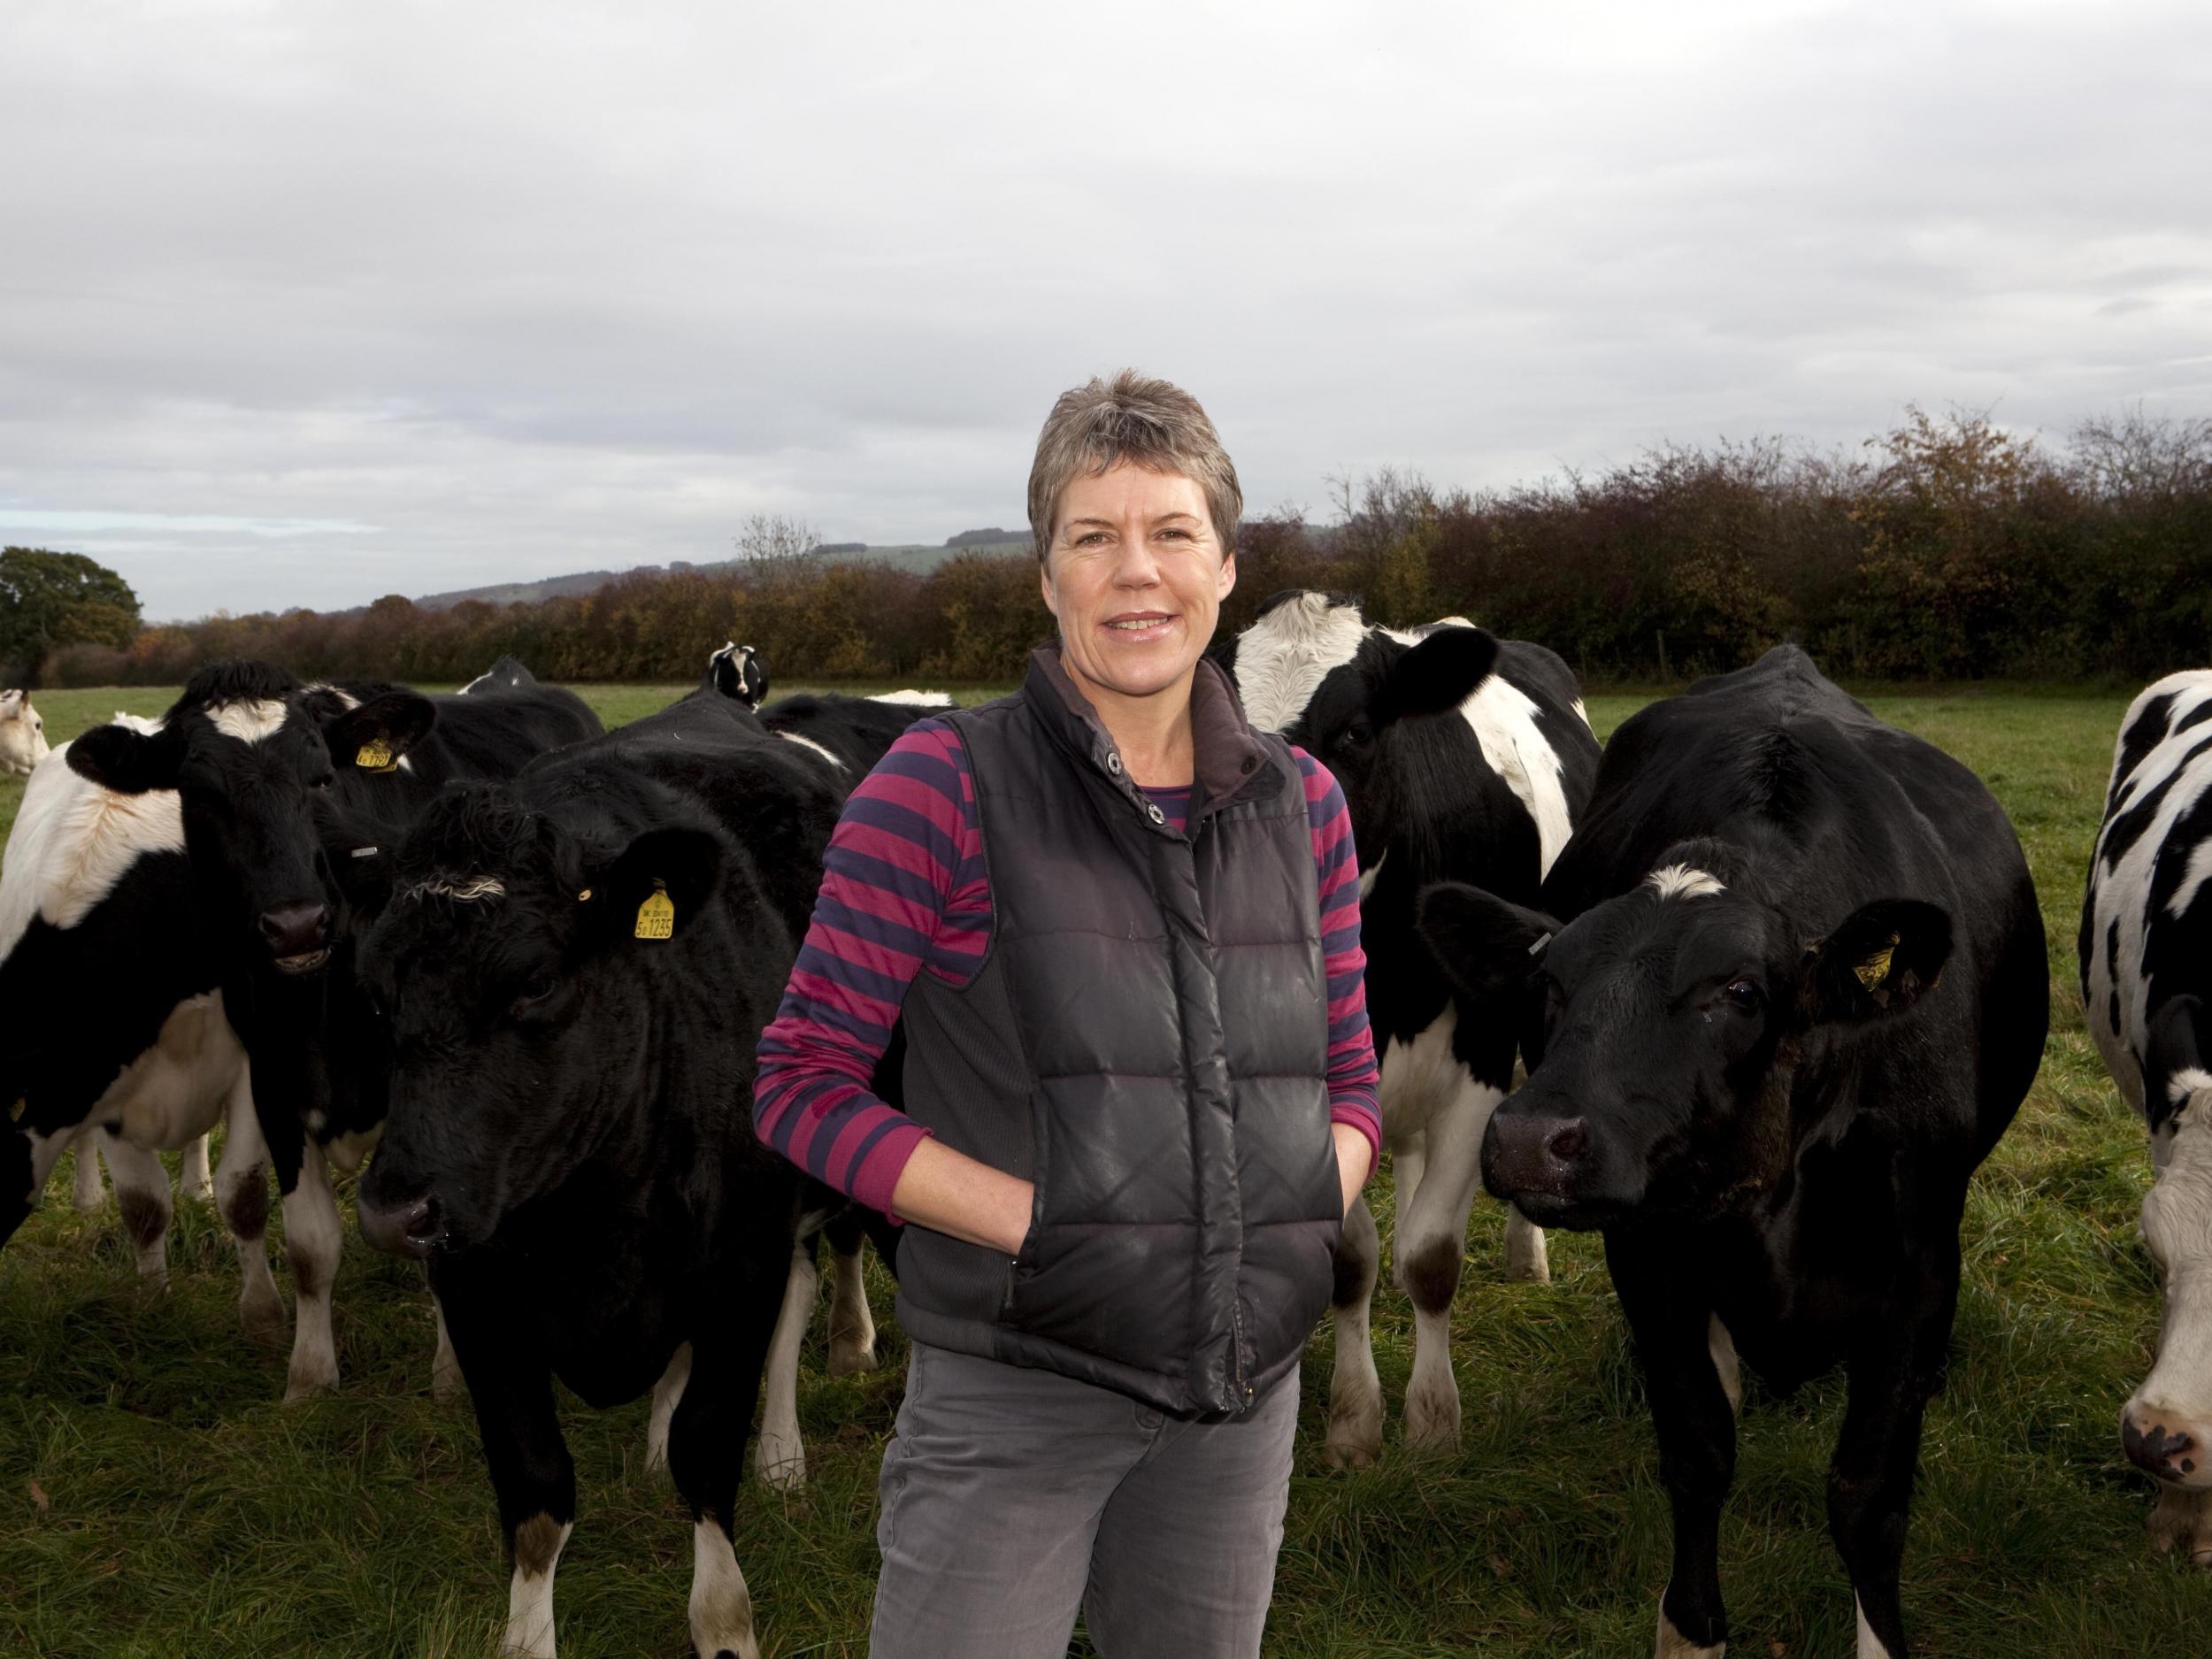 Soil Association CEO Helen Browning says organic exports to the EU ‘could become impossible’ following no-deal Brexit